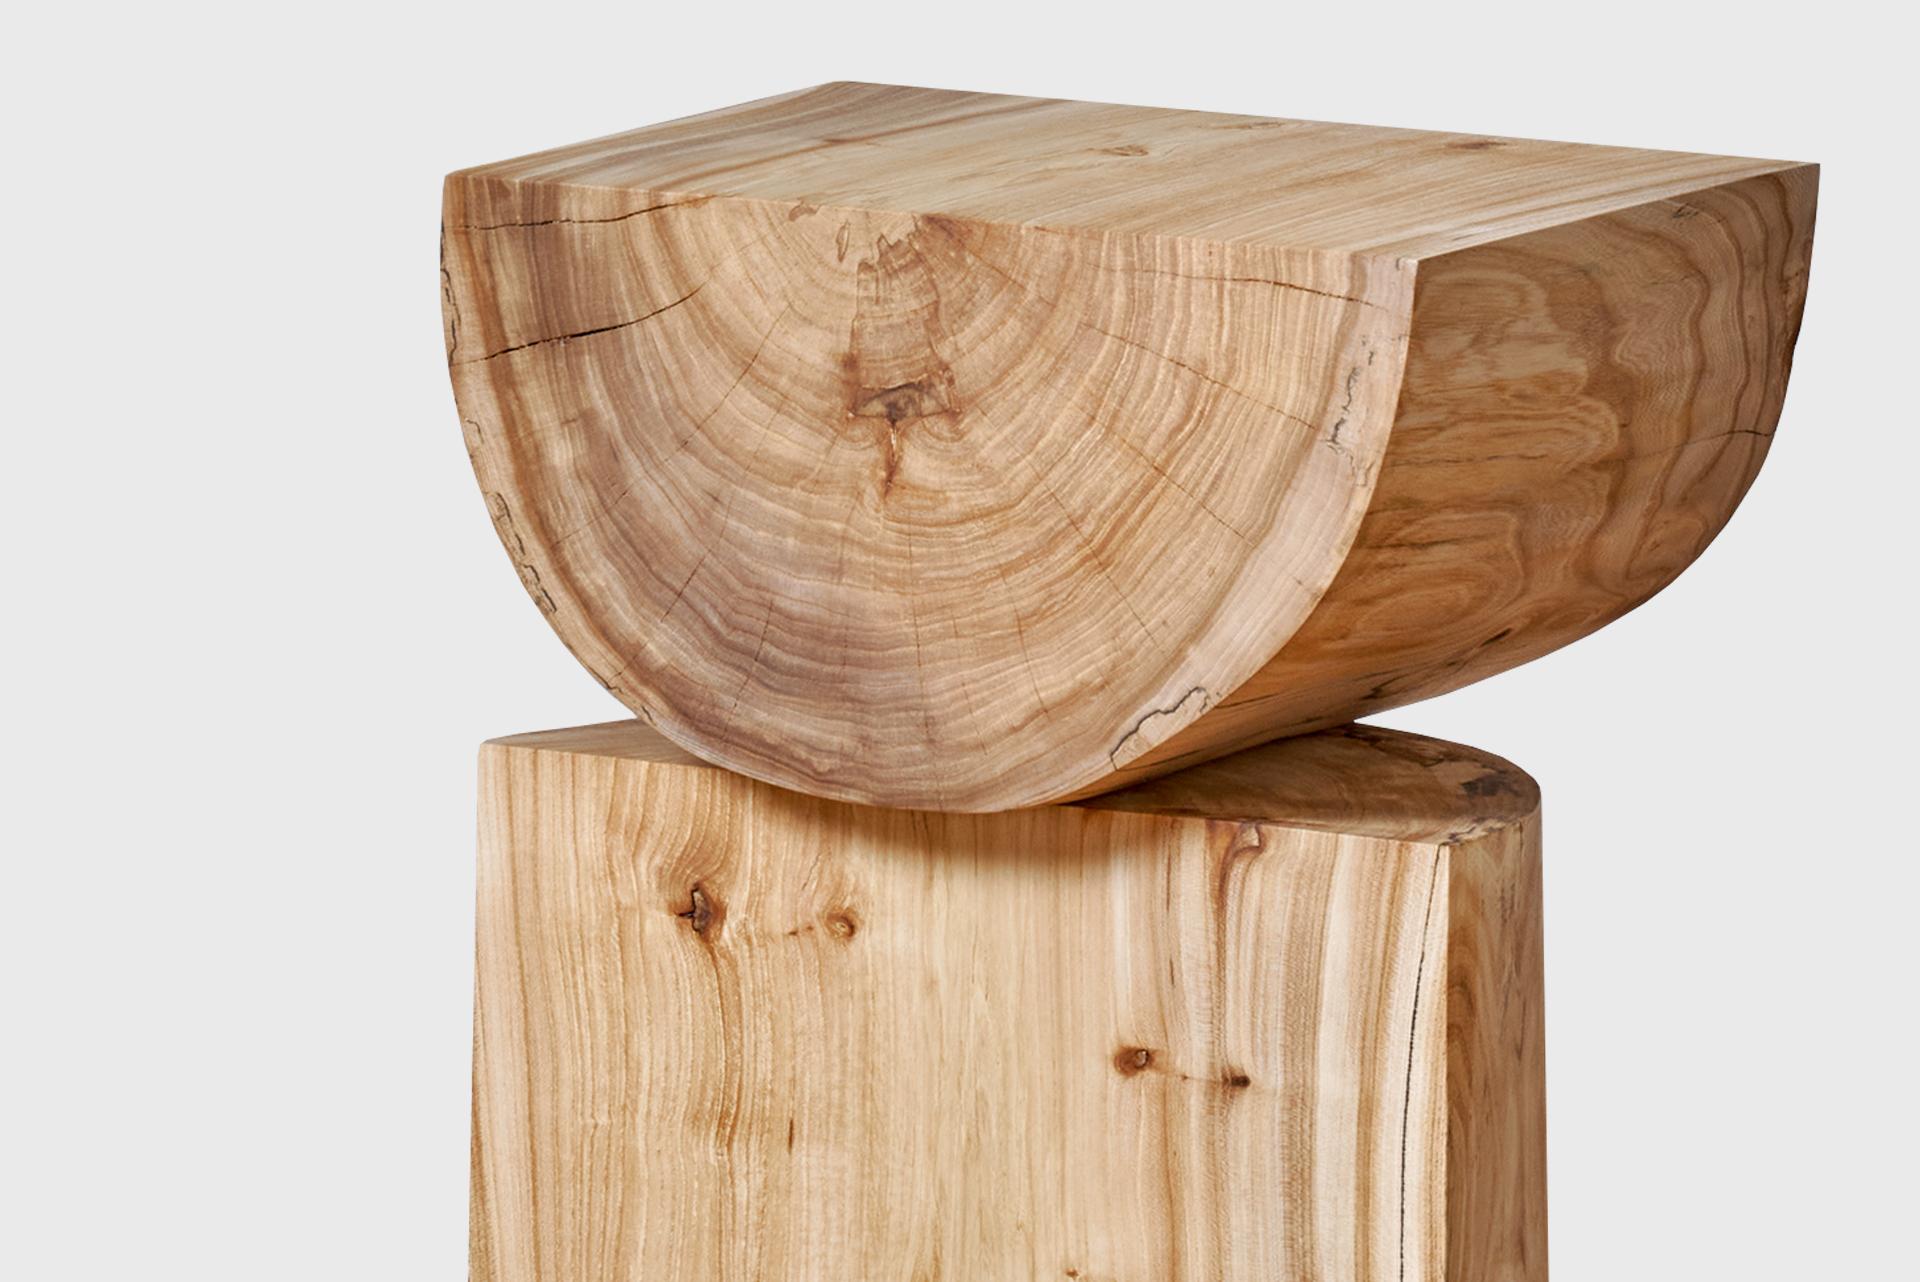 Table / Stool #3.
Manufactured by Jonas Lutz.
Exclusively for SIDE.
Netherlands, 2023.
Natural Elm wood.

Measurements
37 x 29 x 49h cm
14,6 x 11,4 x 19,3h in

Provenance
Rotterdam, Netherlands.

Exhibitions
Casavells